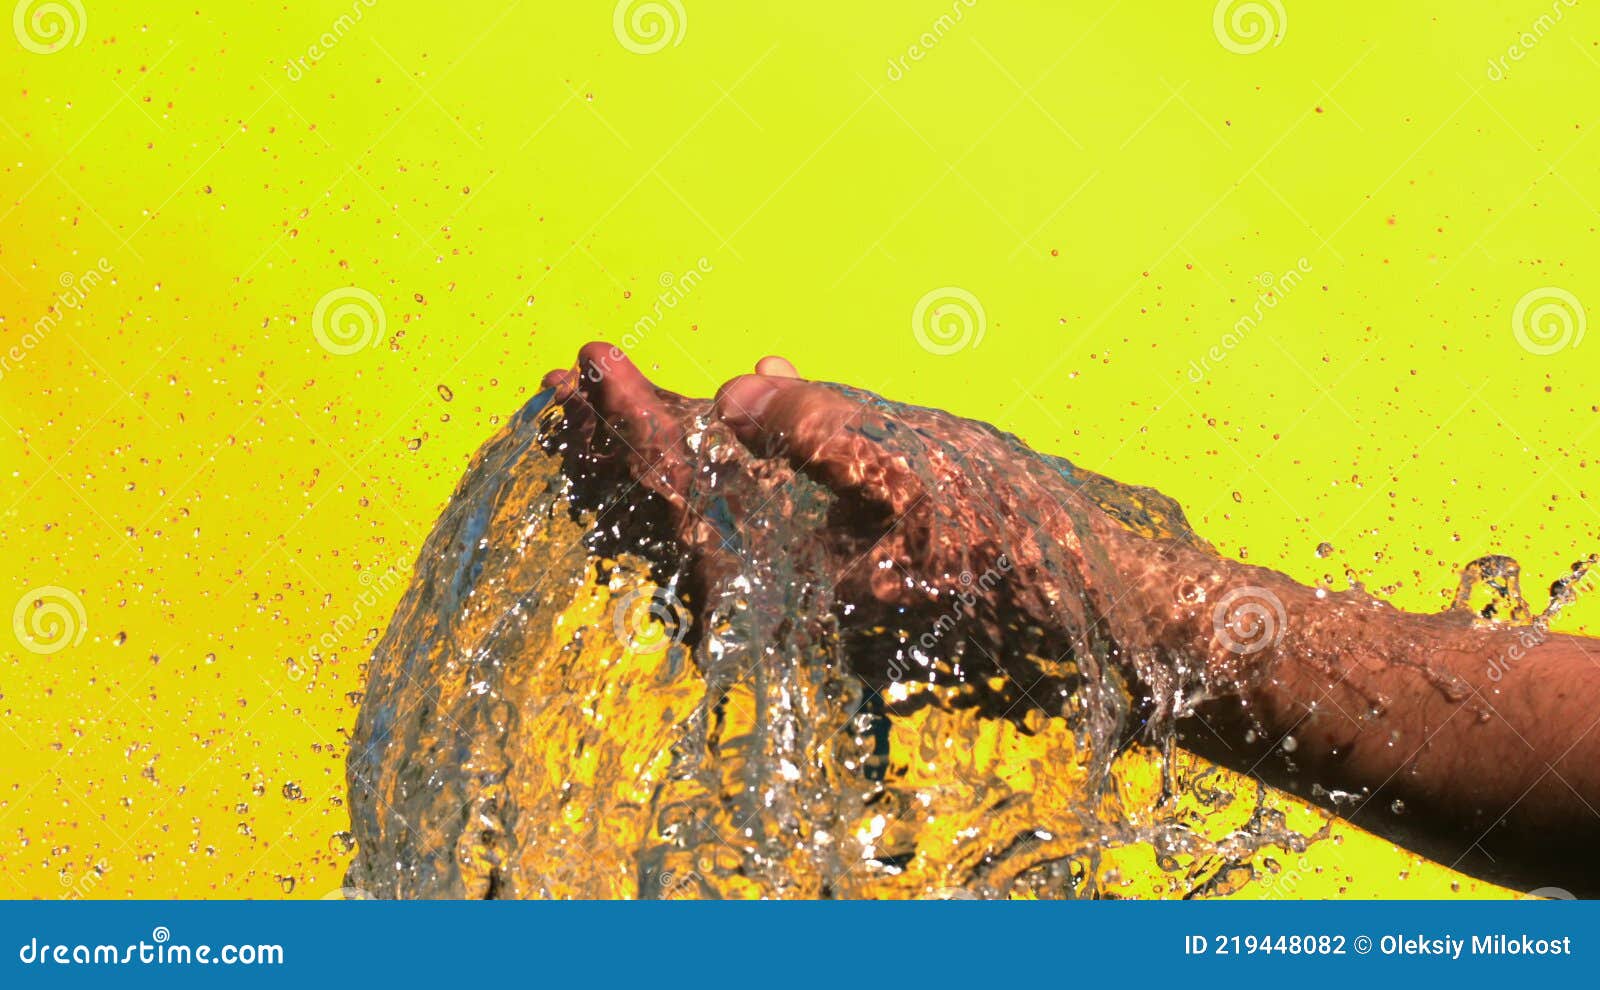 Blue Balloon Popping in a Hand on a Yellow Background in Slow Motion Stock Footage - Video of motion, energy: 219448082